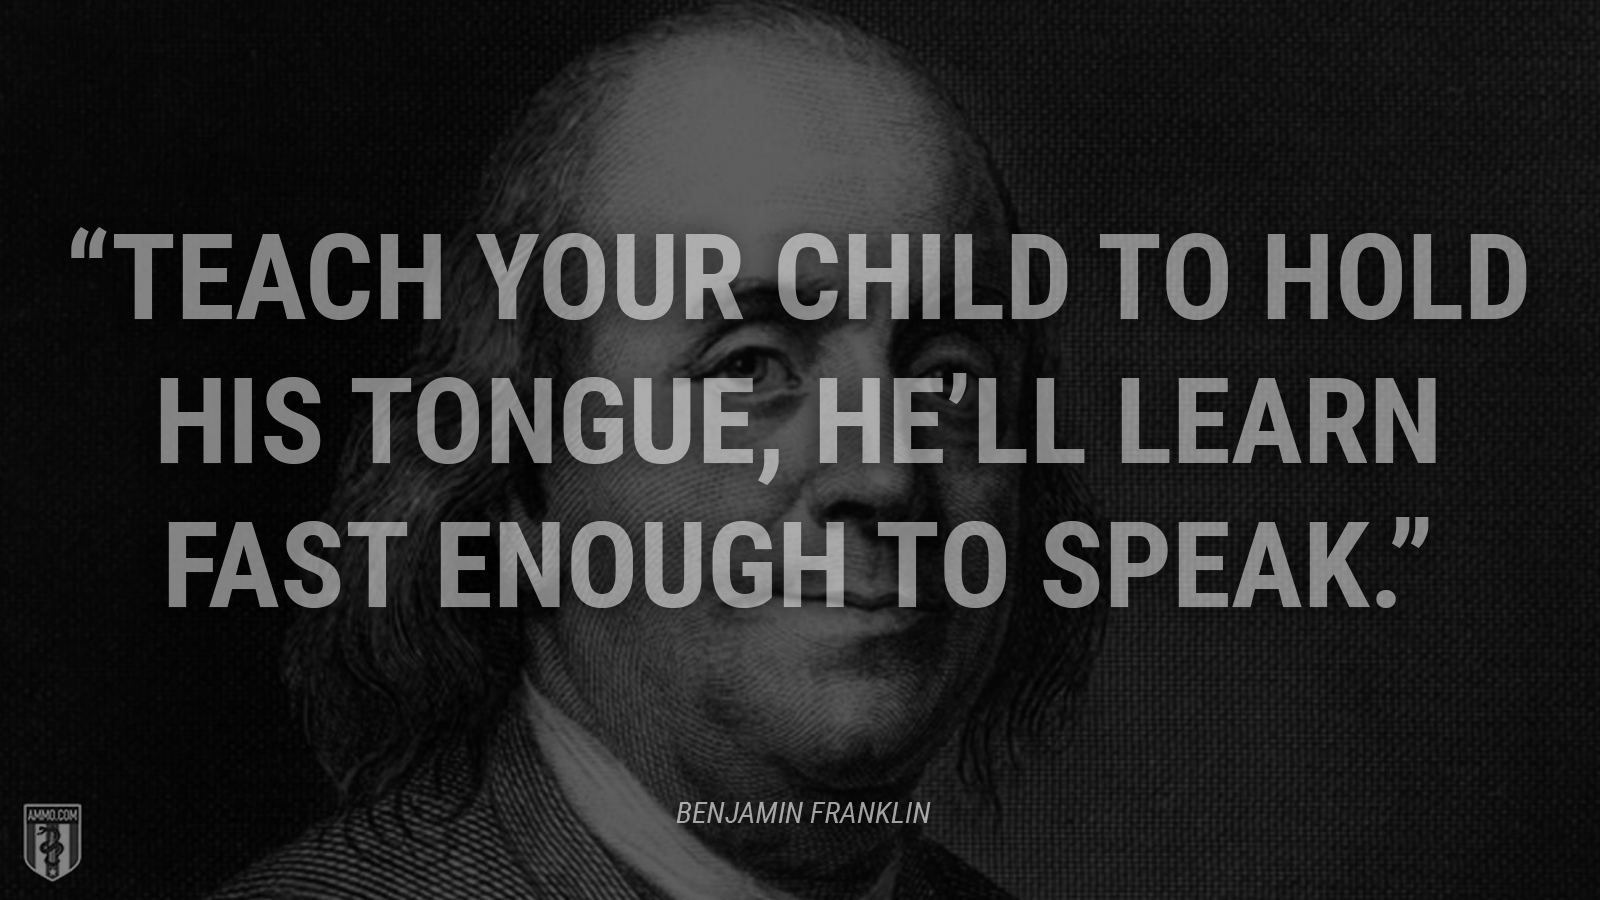 “Teach your child to hold his tongue, he’ll learn fast enough to speak.” - Ben Franklin